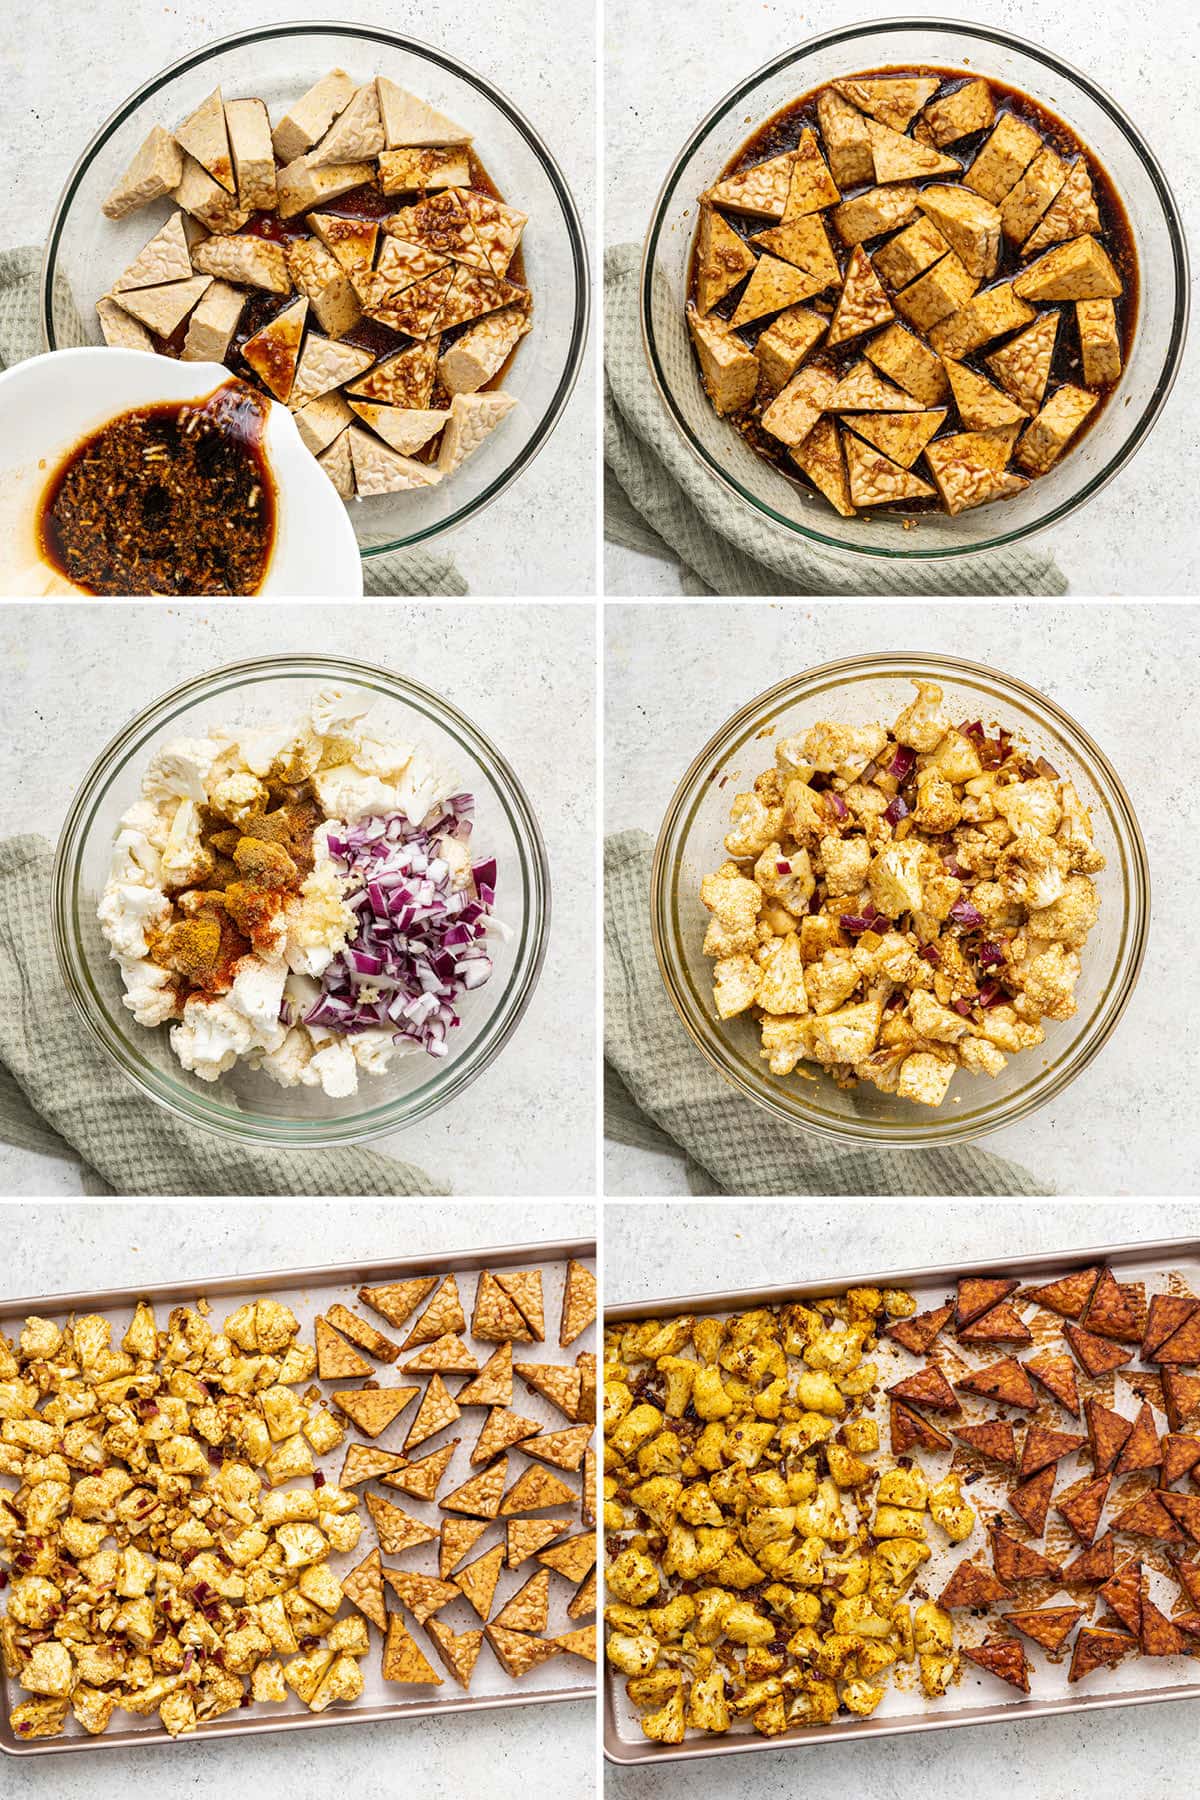 Collage of six photos showing the steps to make Curried Cauliflower and Tempeh Bowl: marinating tempeh in maple balsamic marinade, tossing cauliflower and onion with spices, and then roasting the cauliflower and tempeh on a sheet pan.